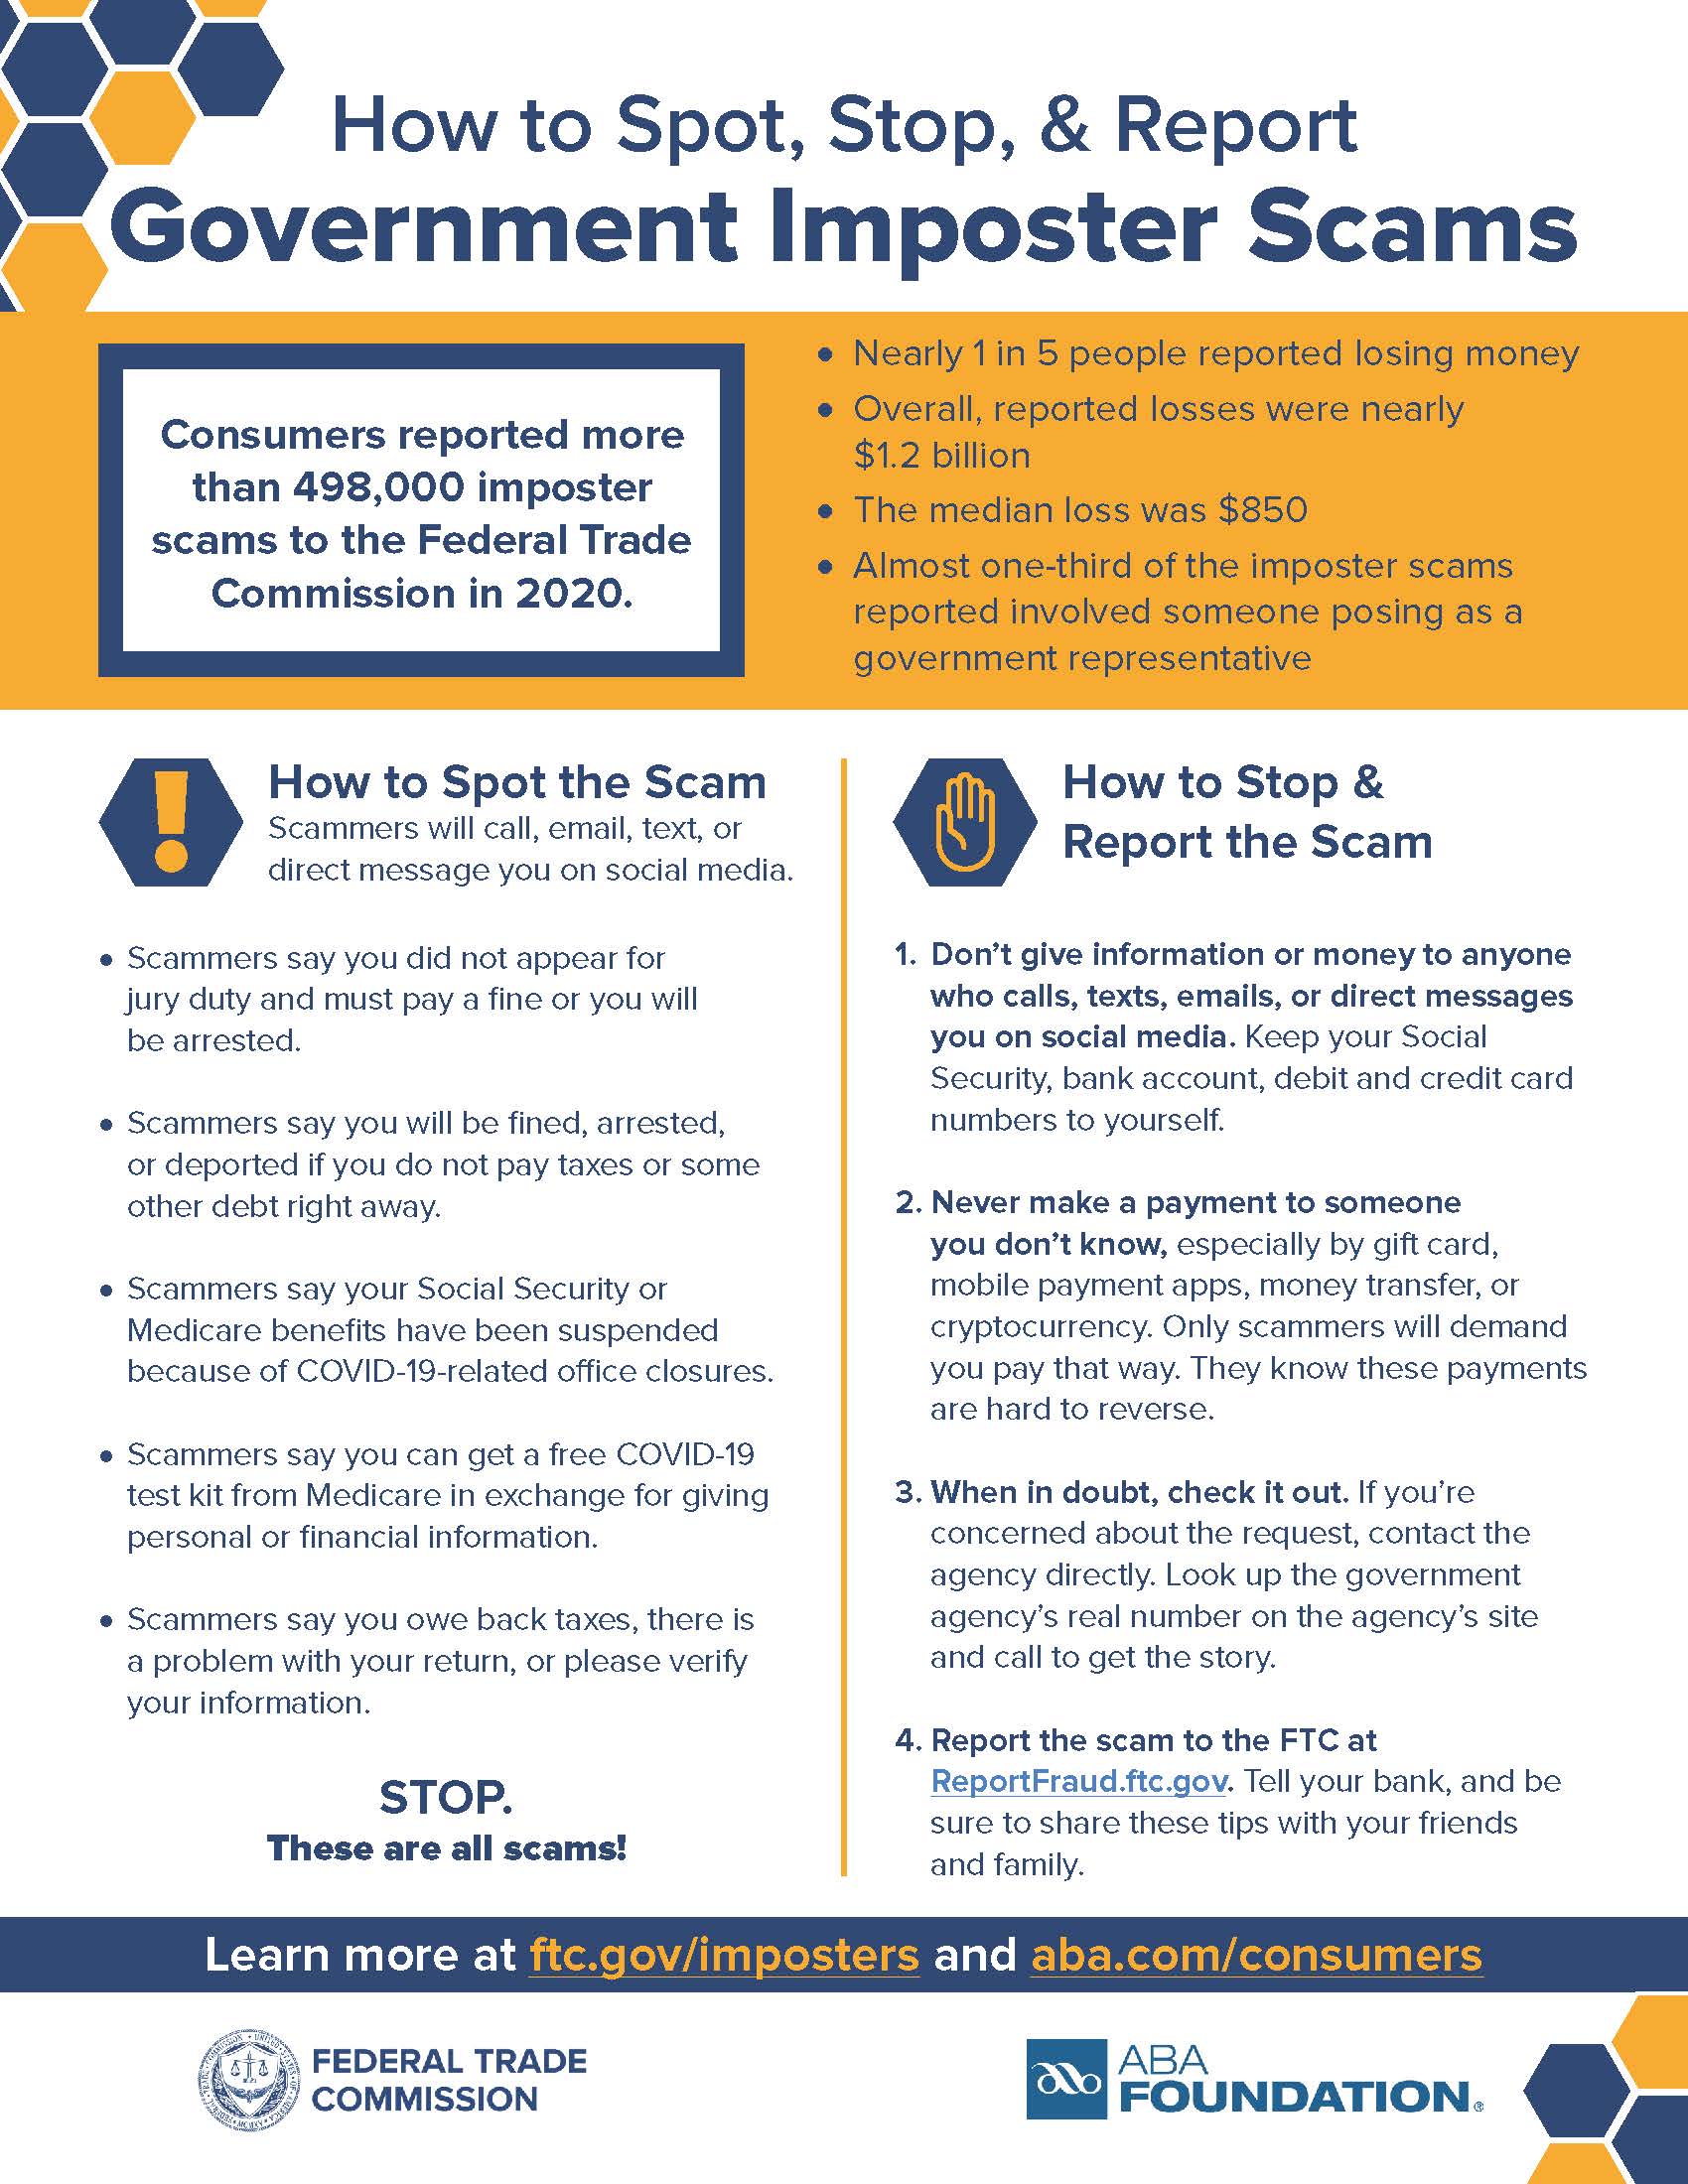 Government imposter scams